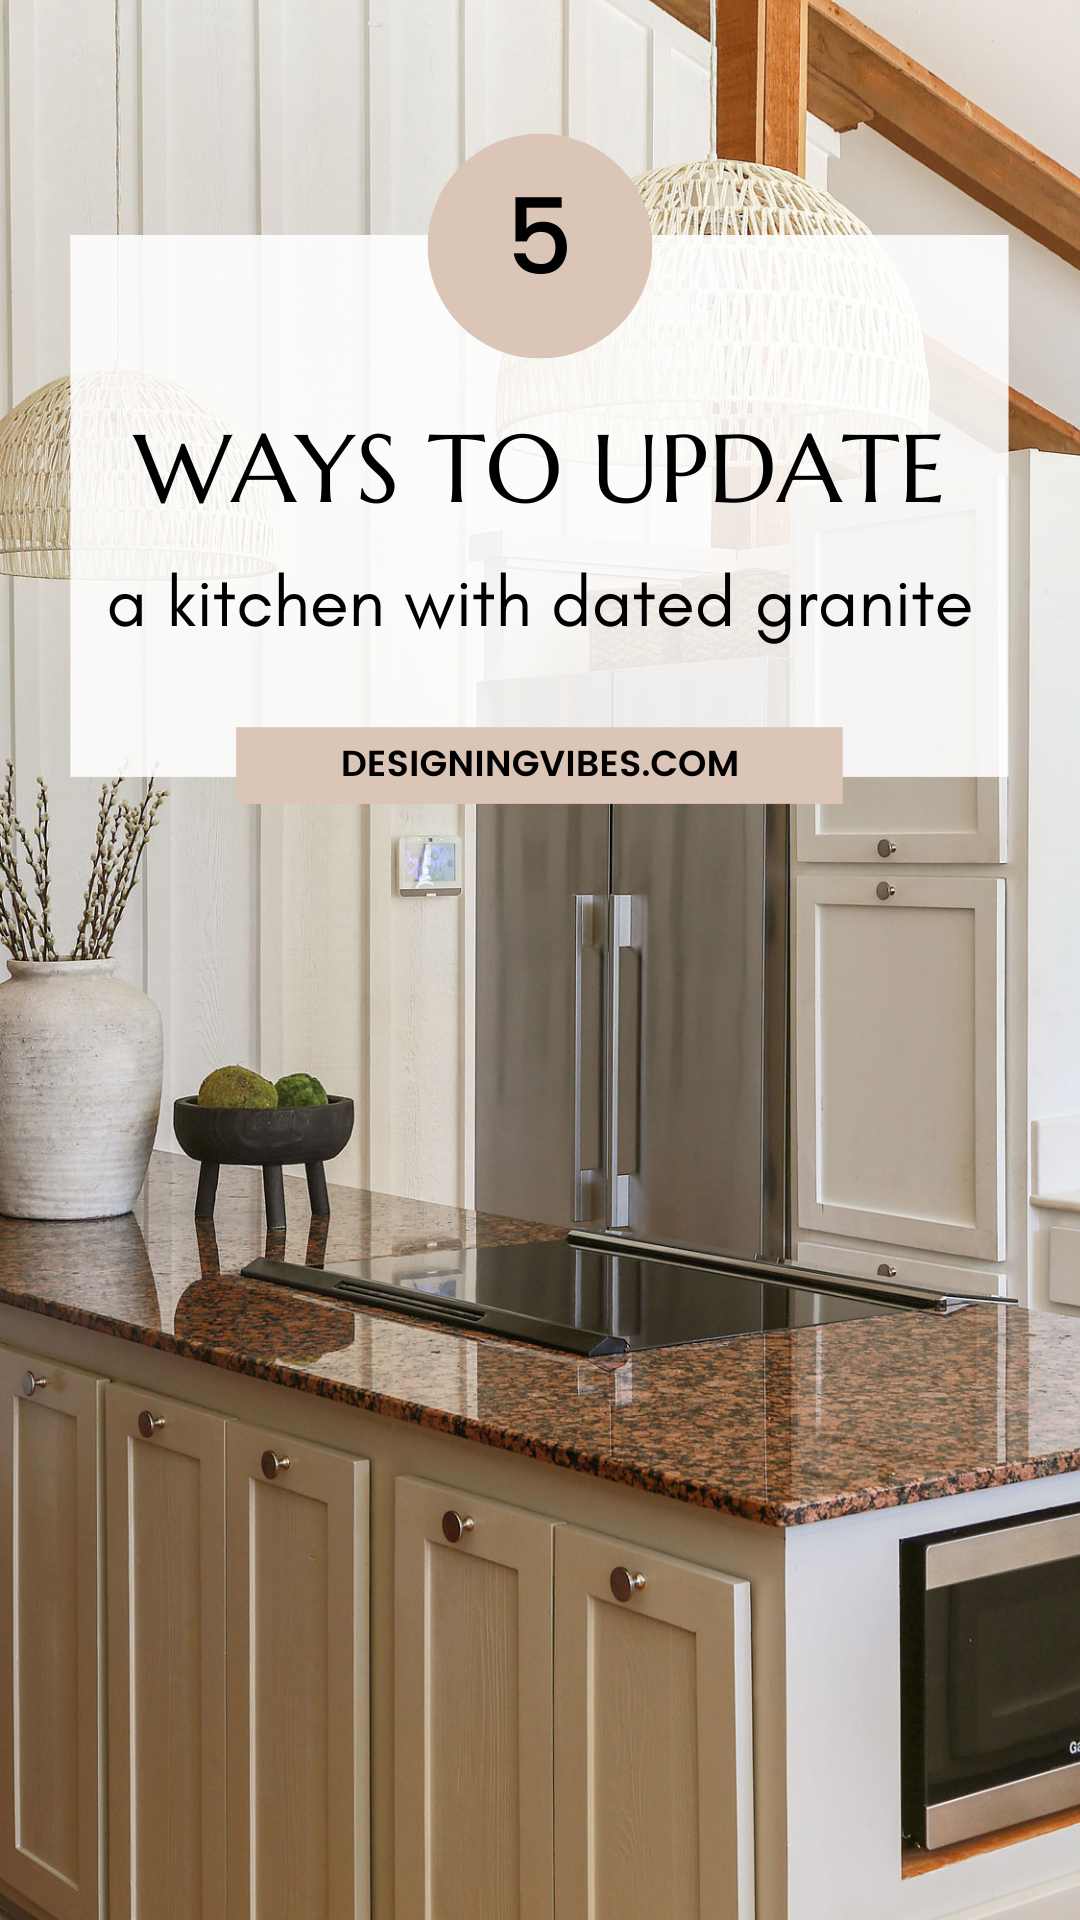 How to Prepare Cabinets for Granite Countertops: Essential Tips